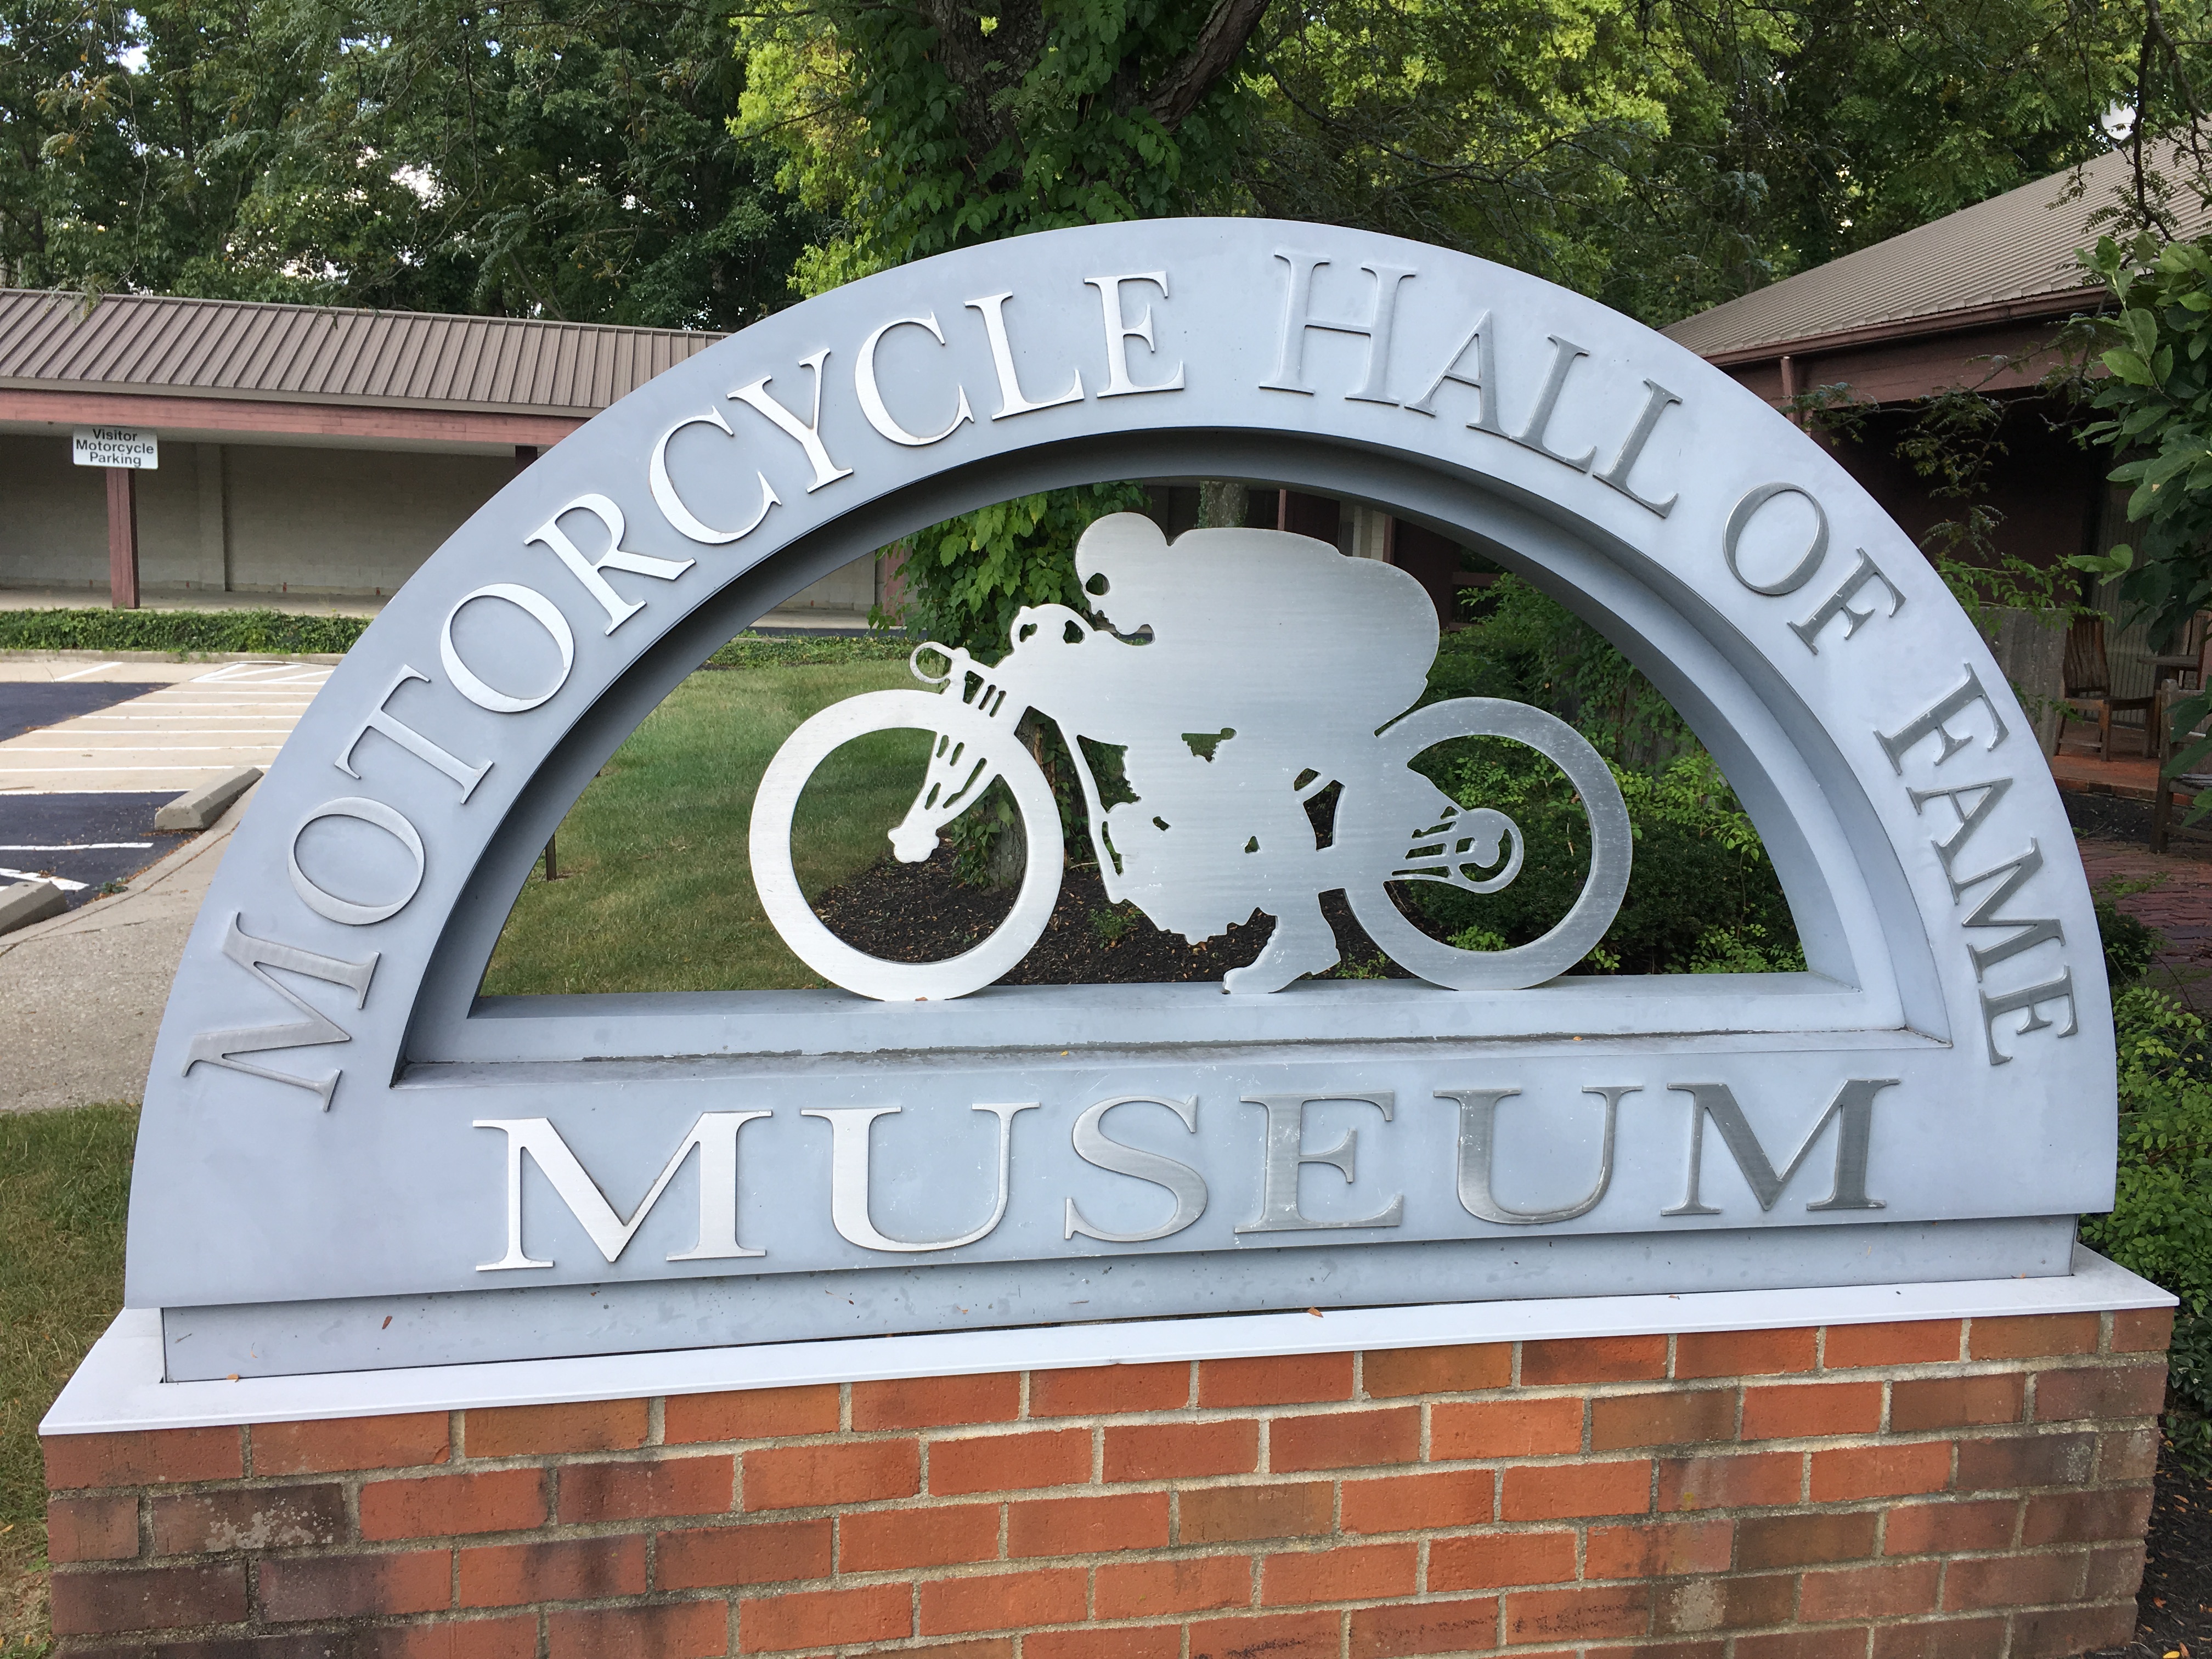 AMA Hall of Fame Museum